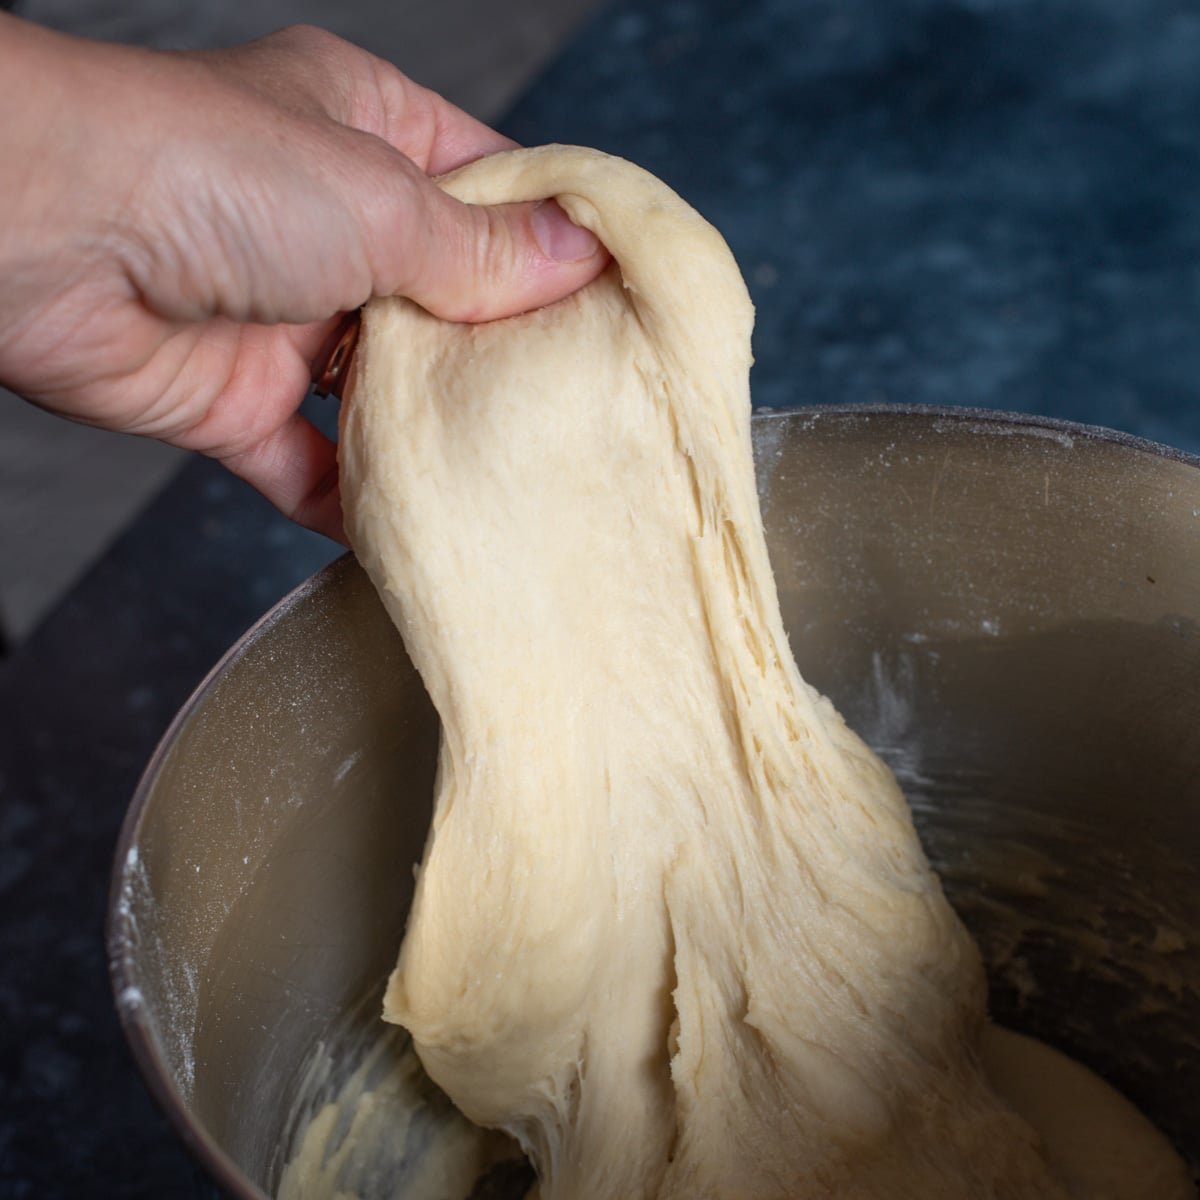 a hand pulling bread dough up from a bowl